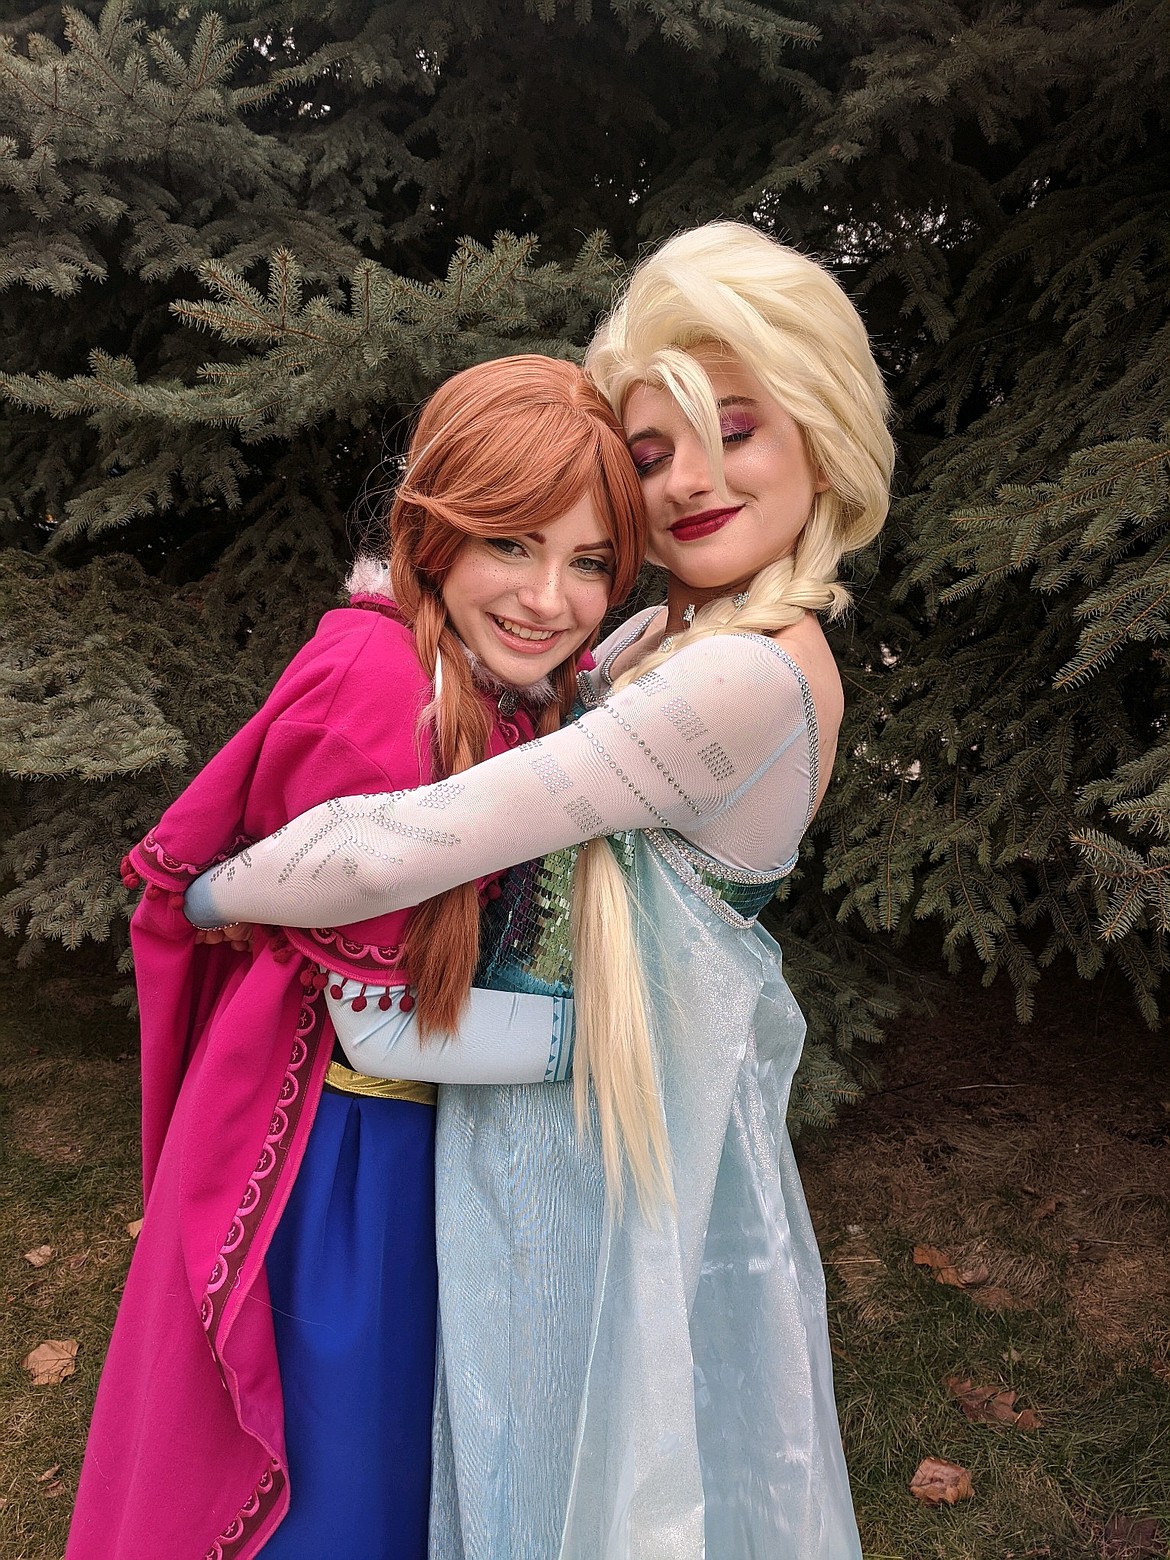 Courtesy photo 
 The Ice Princesses, from the movie "Frozen," are among the characters available for private parties throughDreams are Forever Events, located in Dalton Gardens.